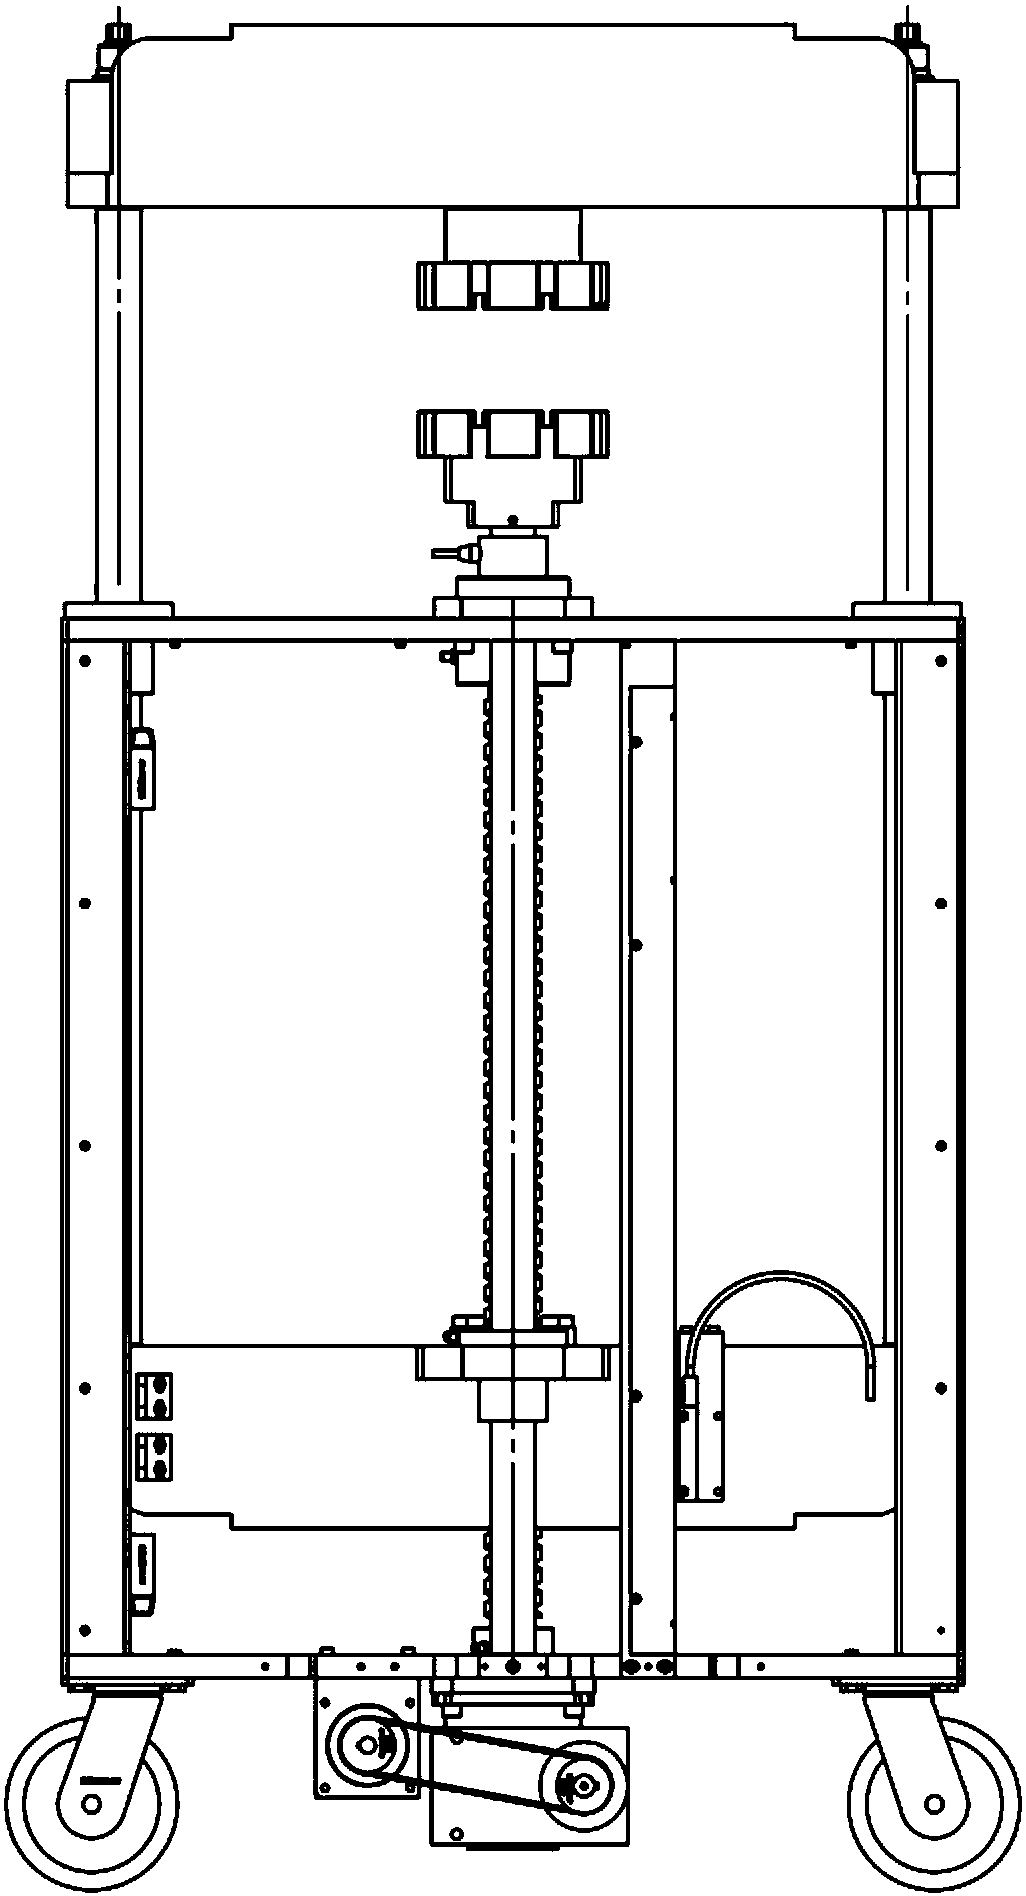 Fuel cell press